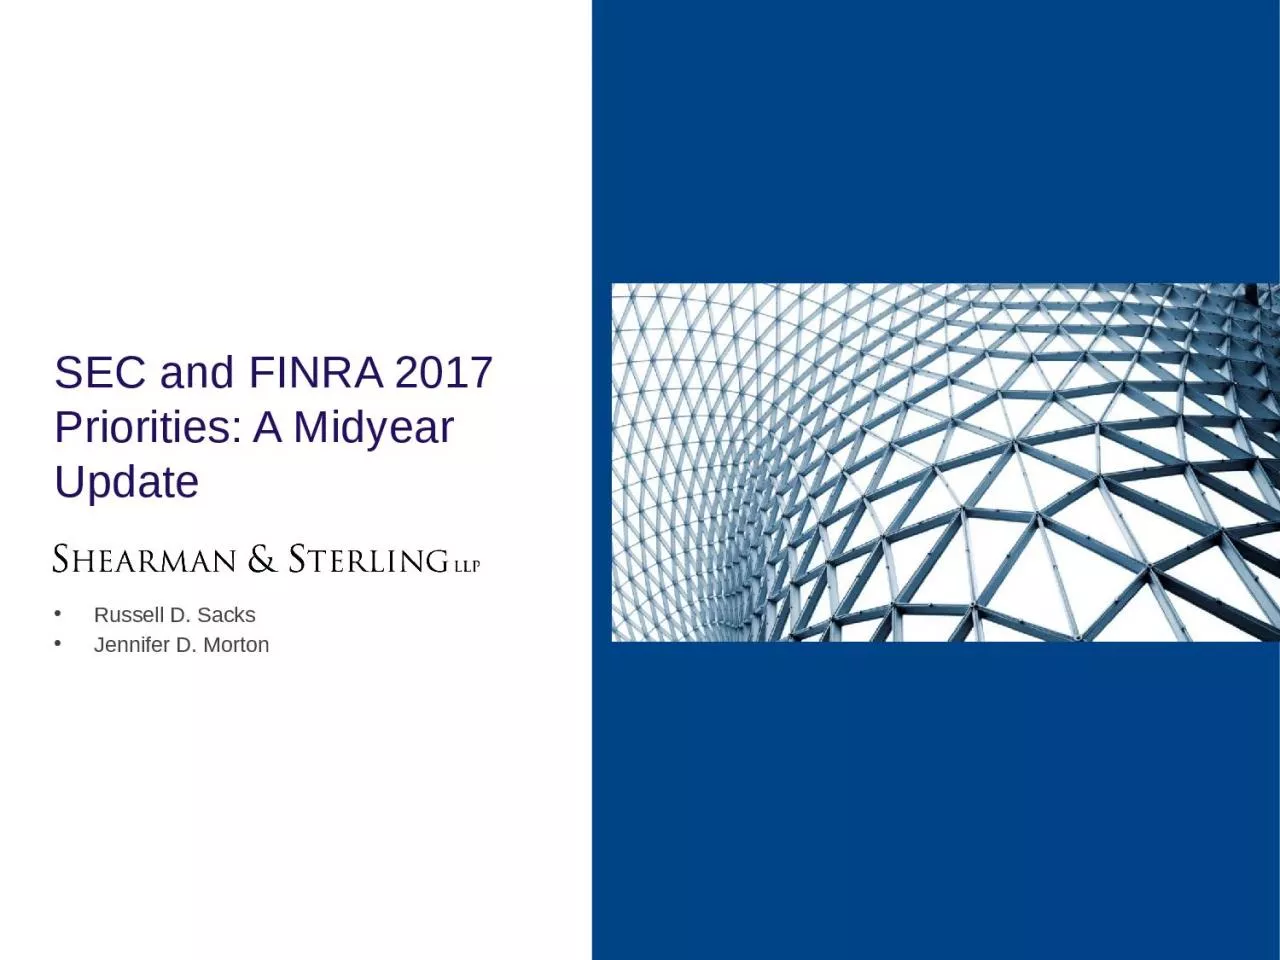 SEC and FINRA 2017 Priorities: A Midyear Update